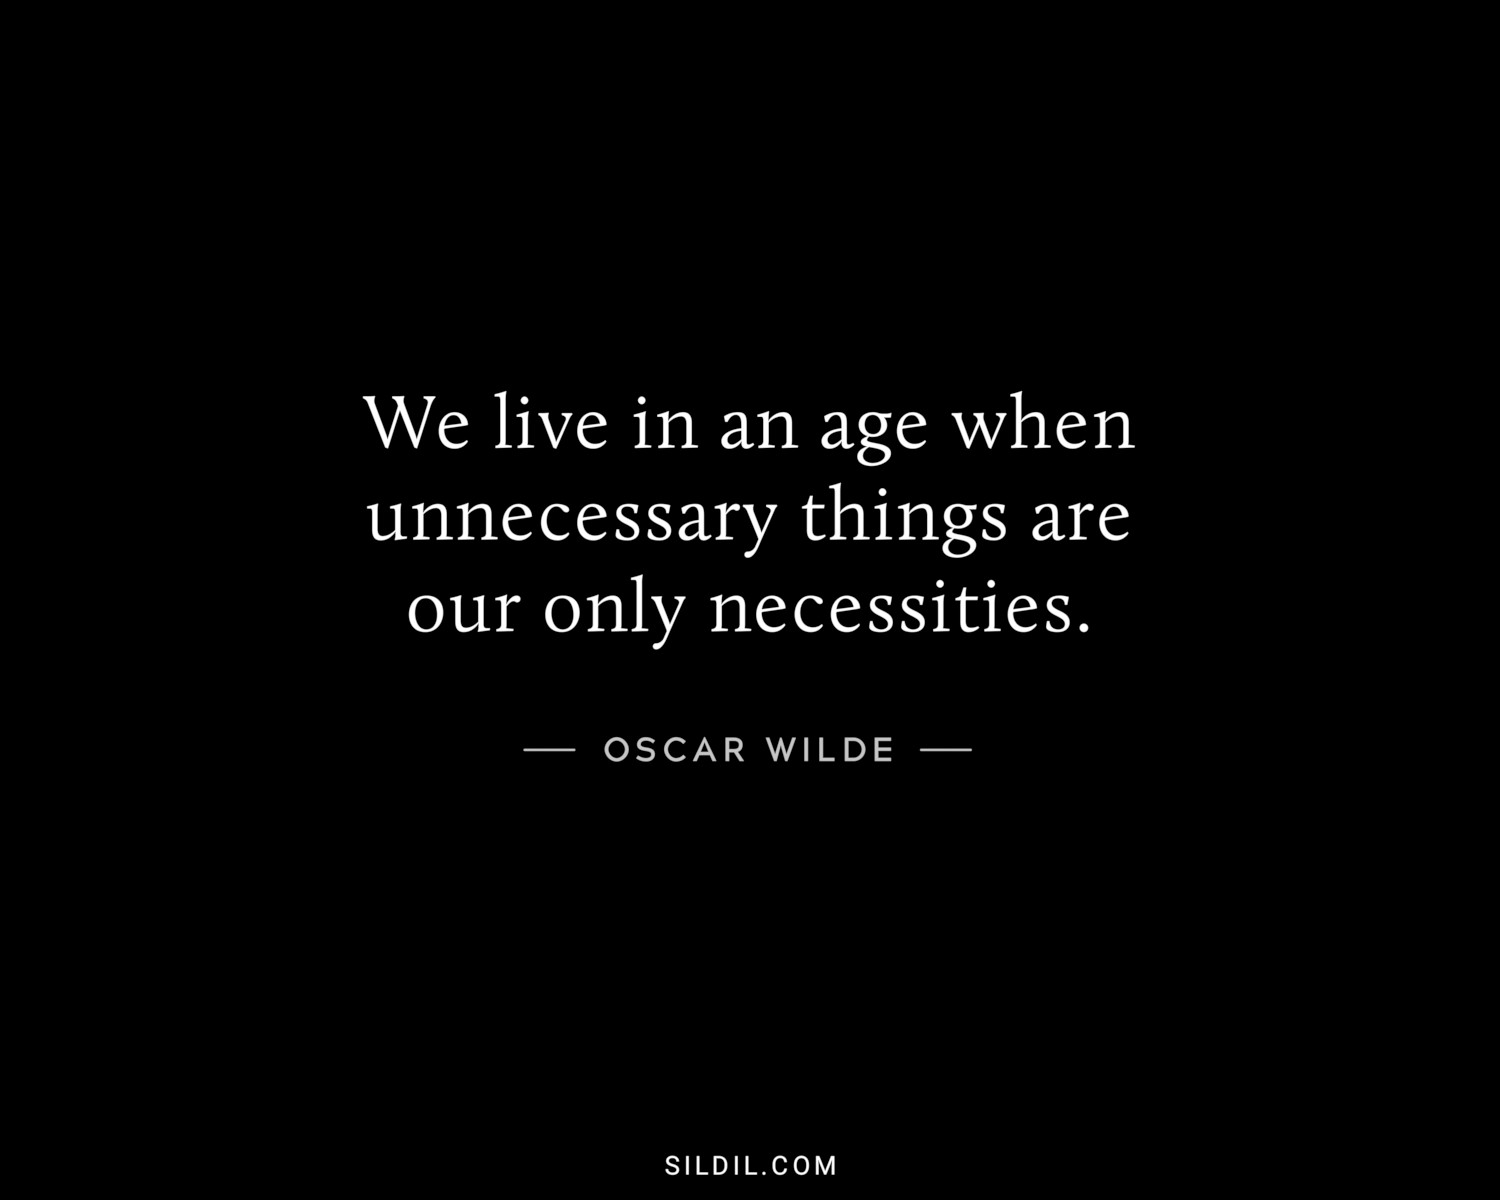 We live in an age when unnecessary things are our only necessities.